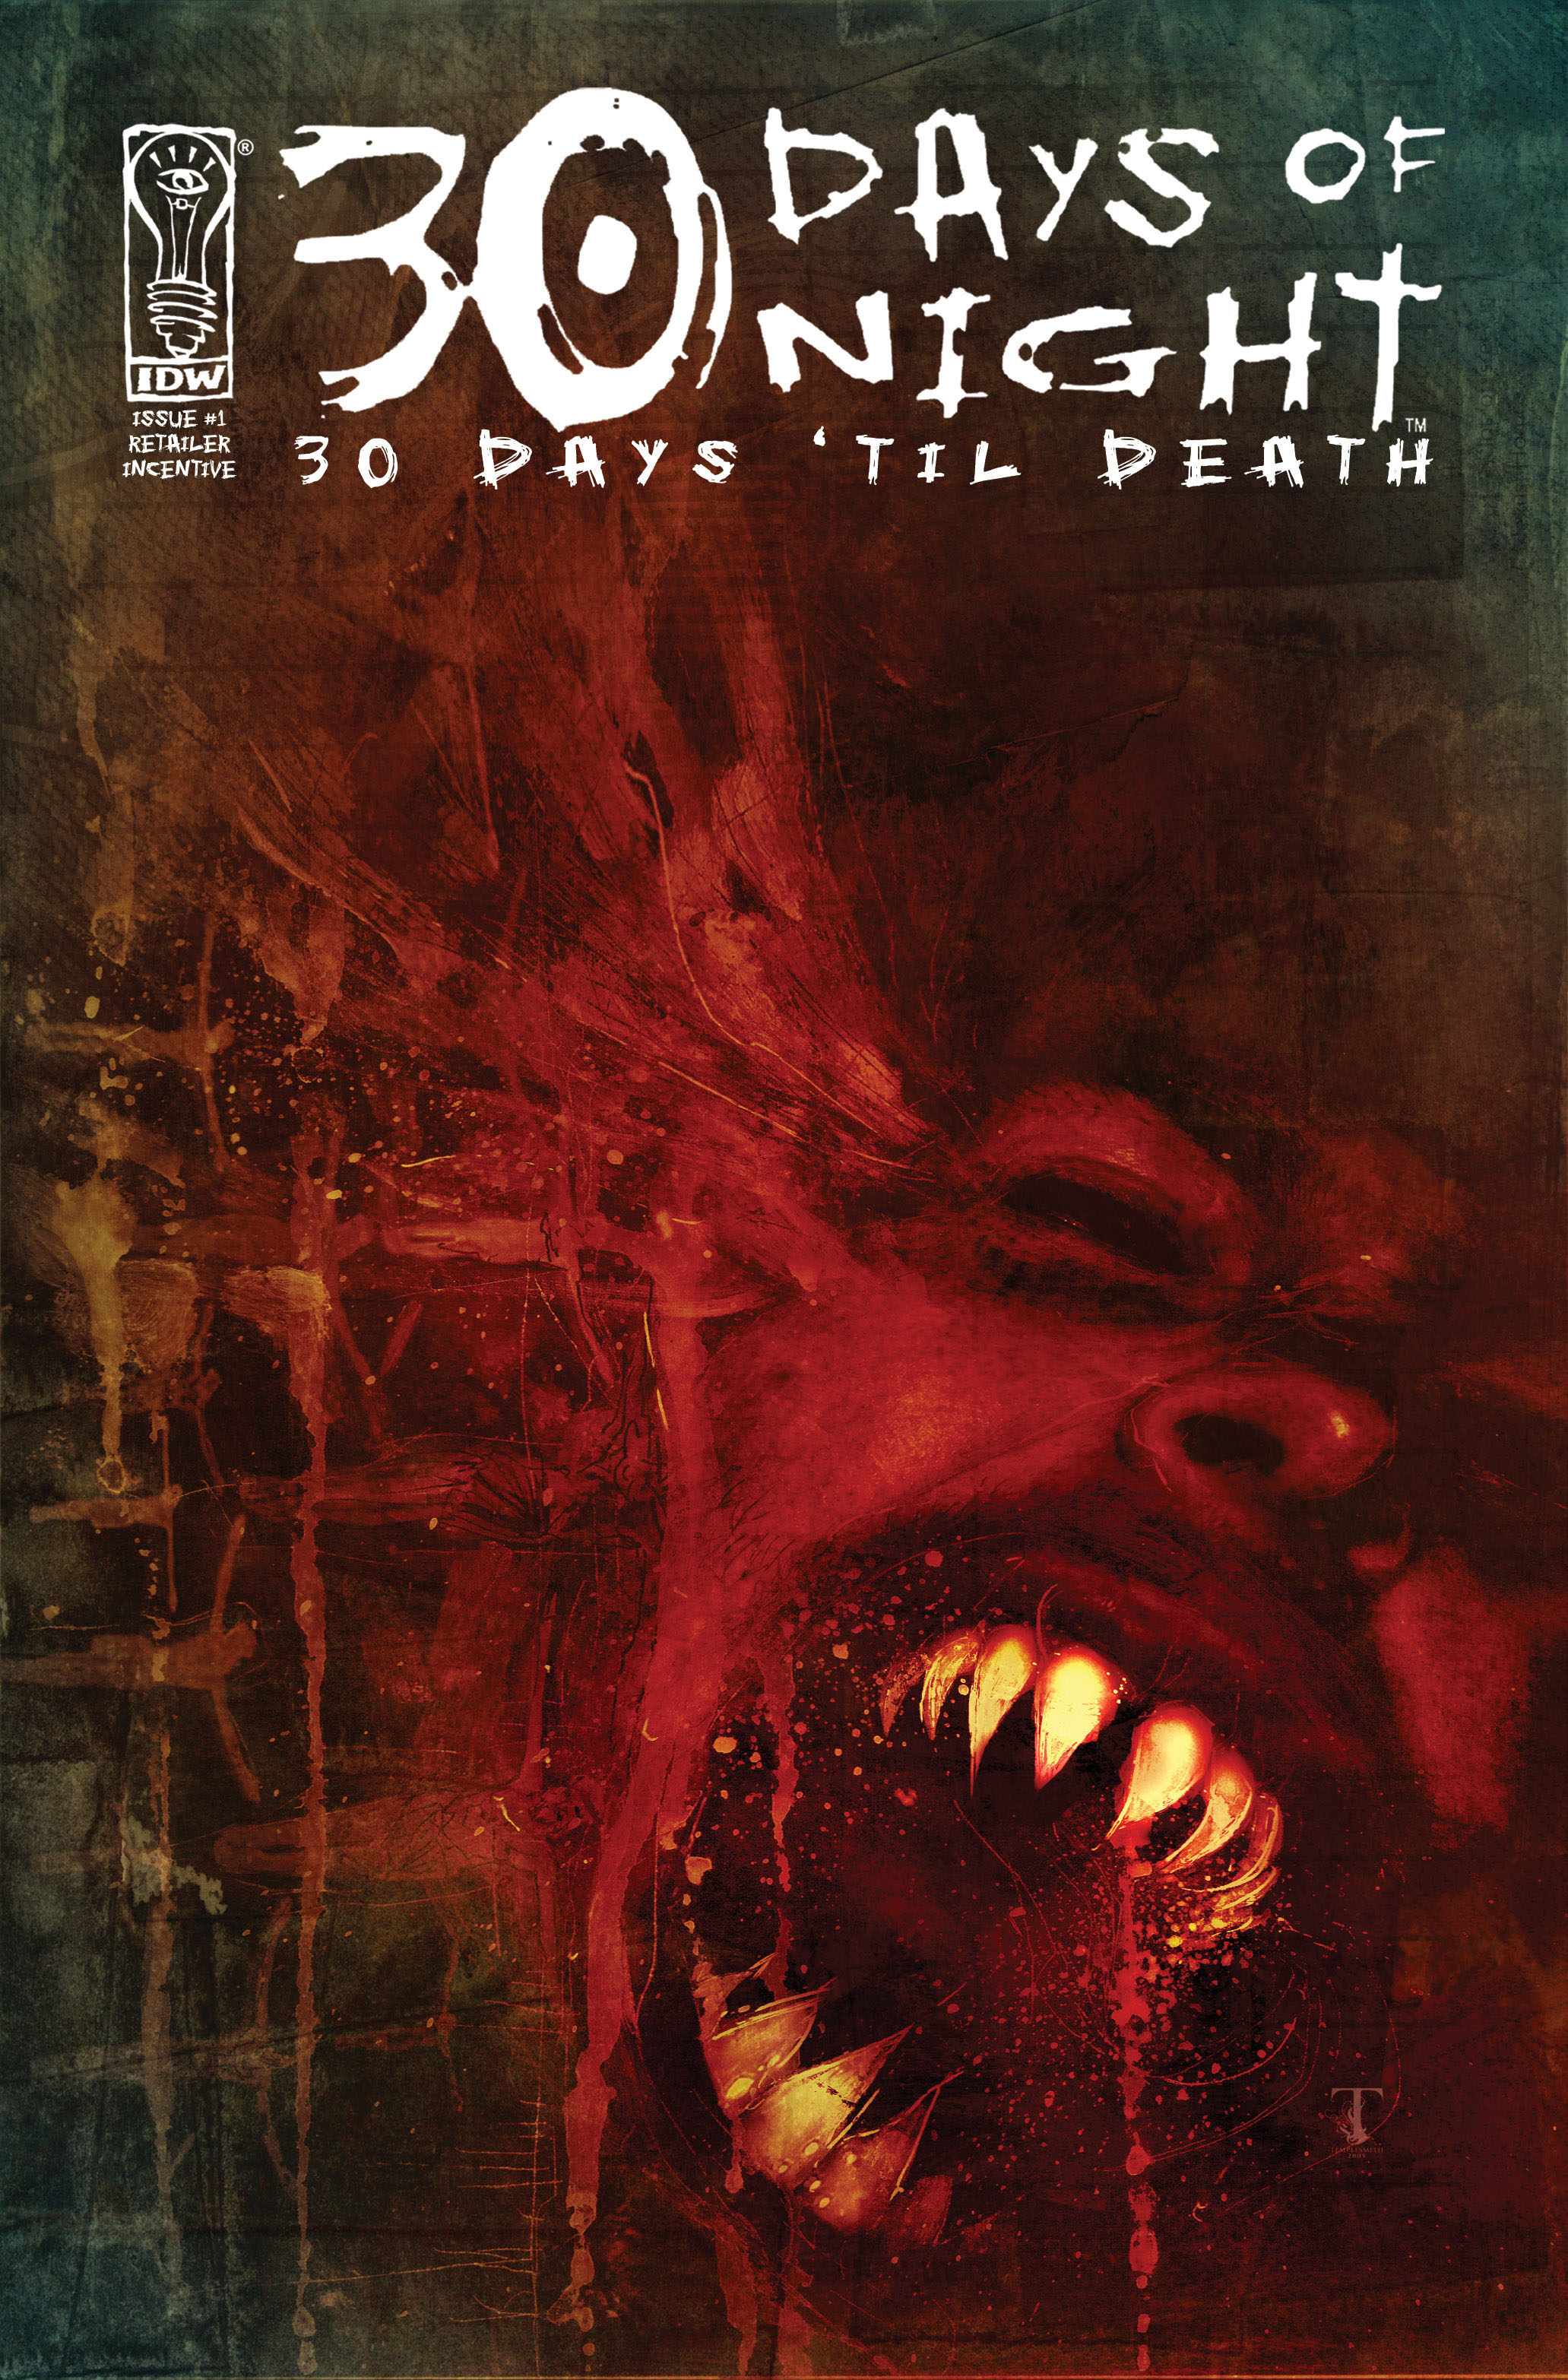 Read online 30 Days of Night: 30 Days 'til Death comic -  Issue #1 - 2